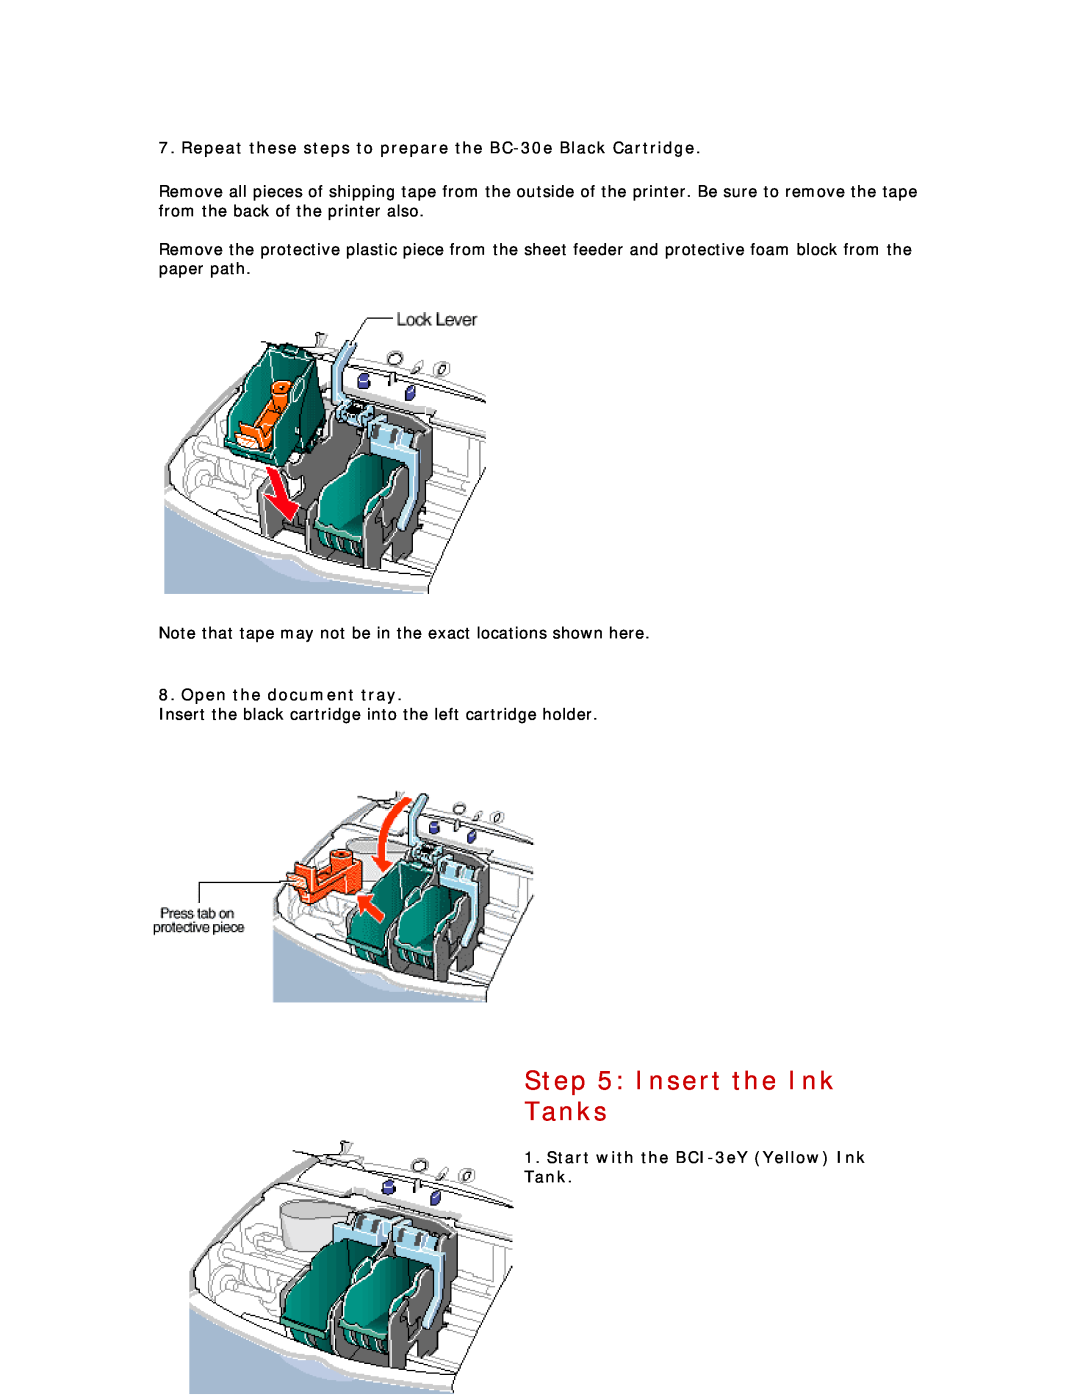 Canon S450 manual Insert the Ink Tanks, Repeat these steps to prepare the BC-30e Black Cartridge, Open the document tray 